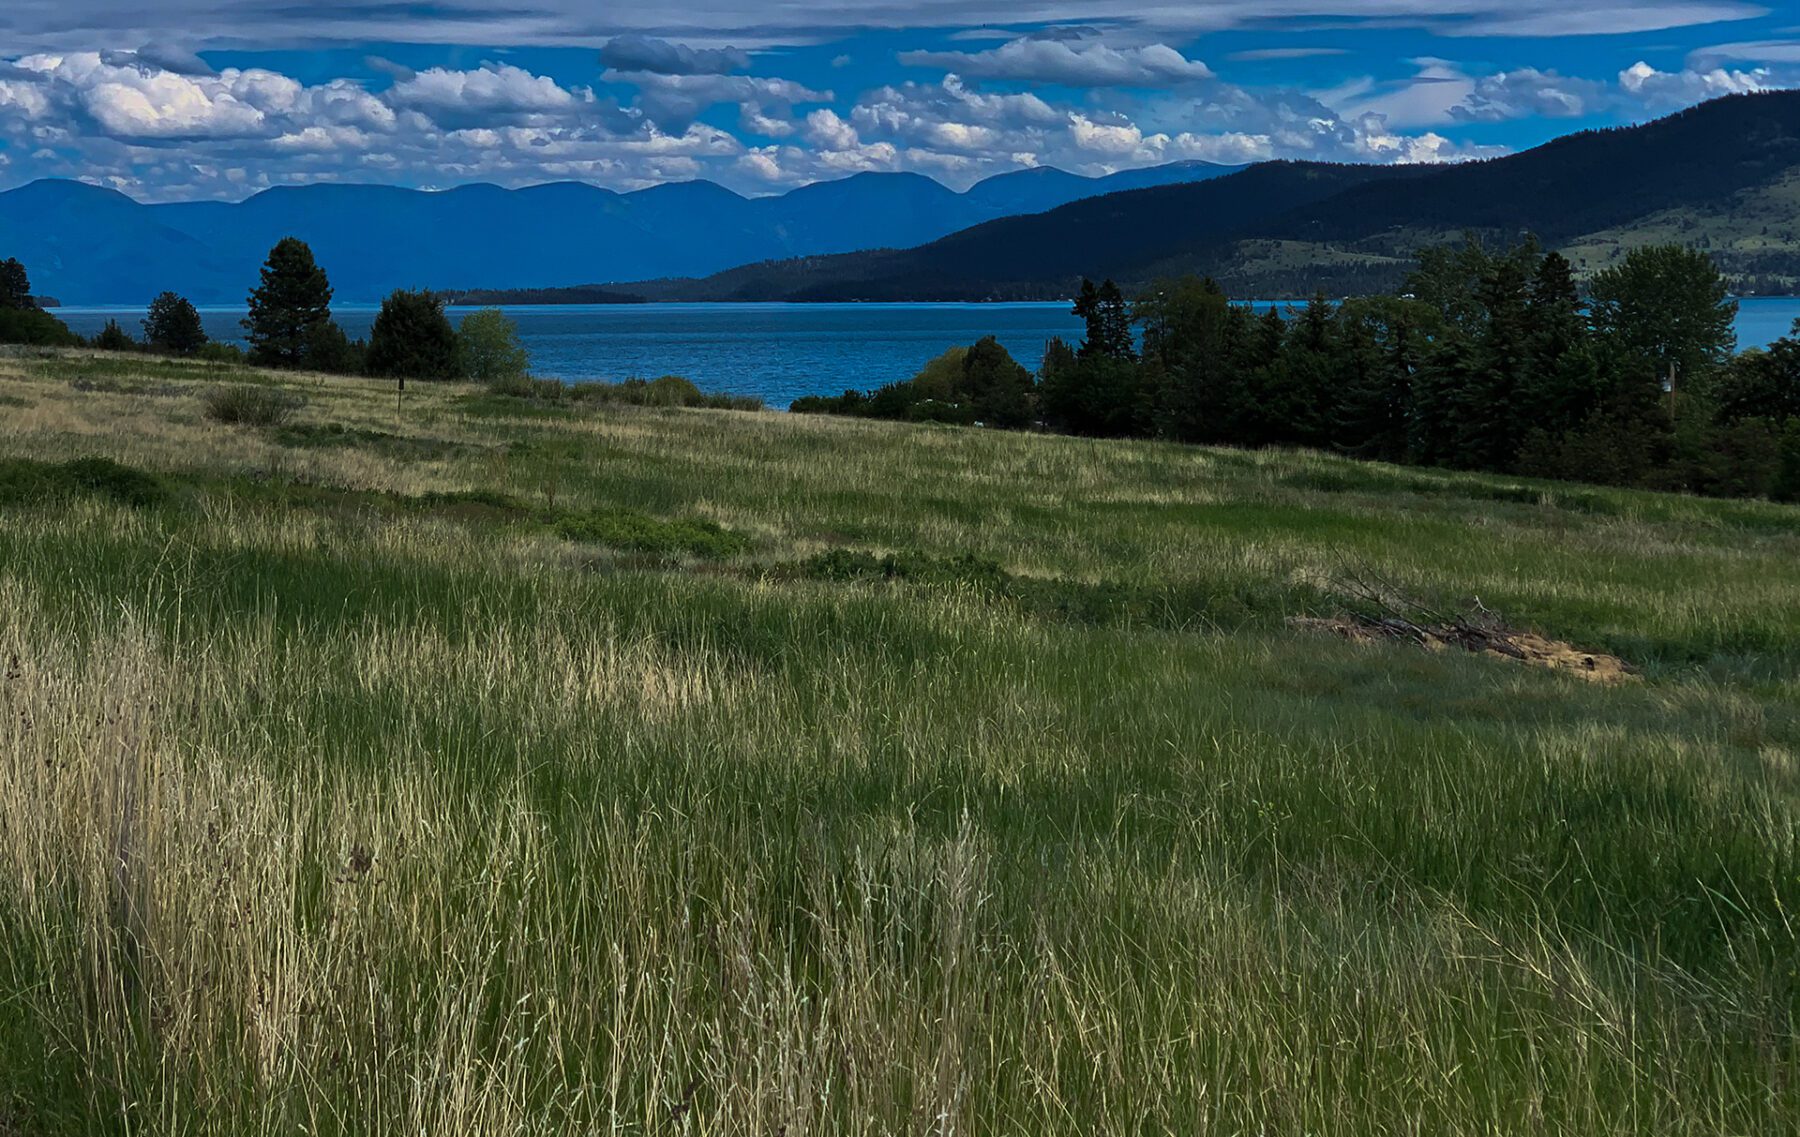 A grassy field with a lake and mountains in the background.